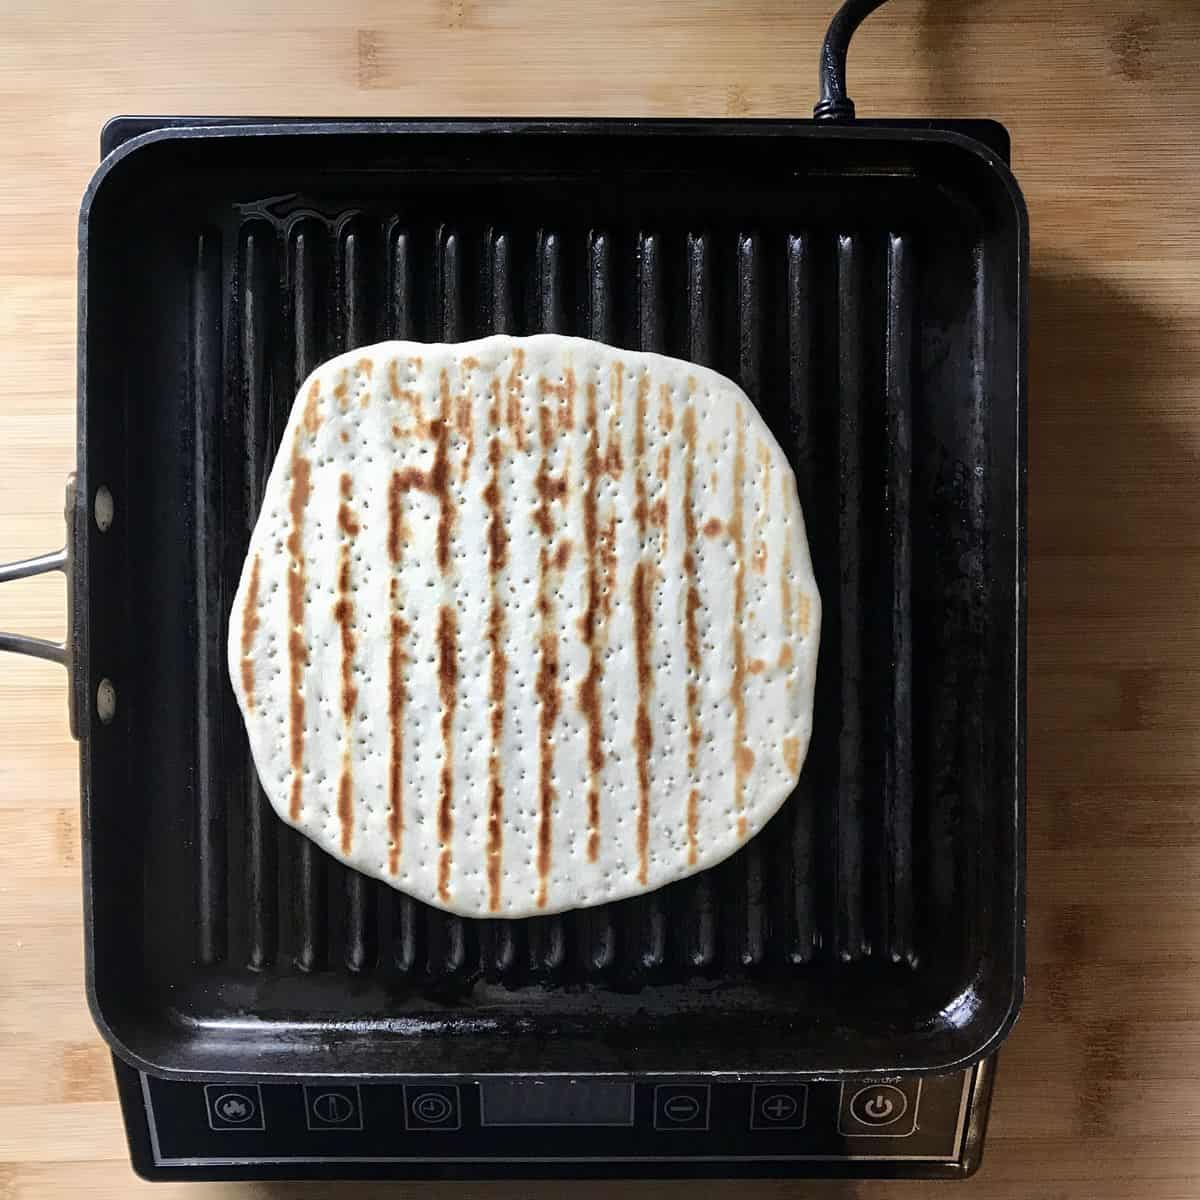 An Italian flatbread in a griddle pan.